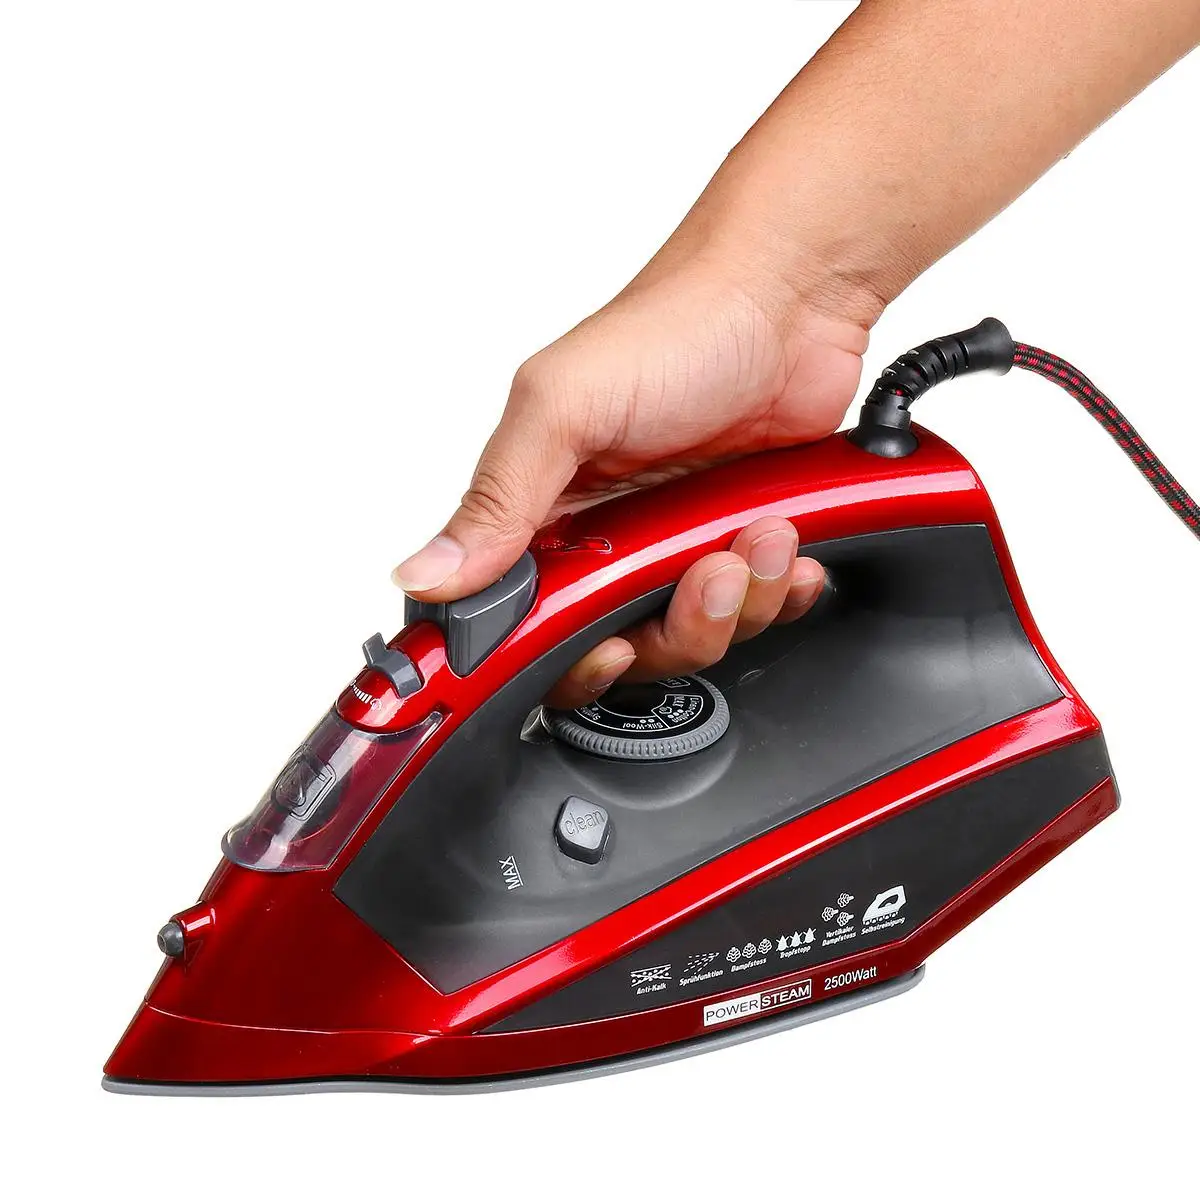 

220V 2500W Electric Steam Iron for Travel Home Garment Steam Generator 4 Speed Clothes Ironing Steamer Coated Plate